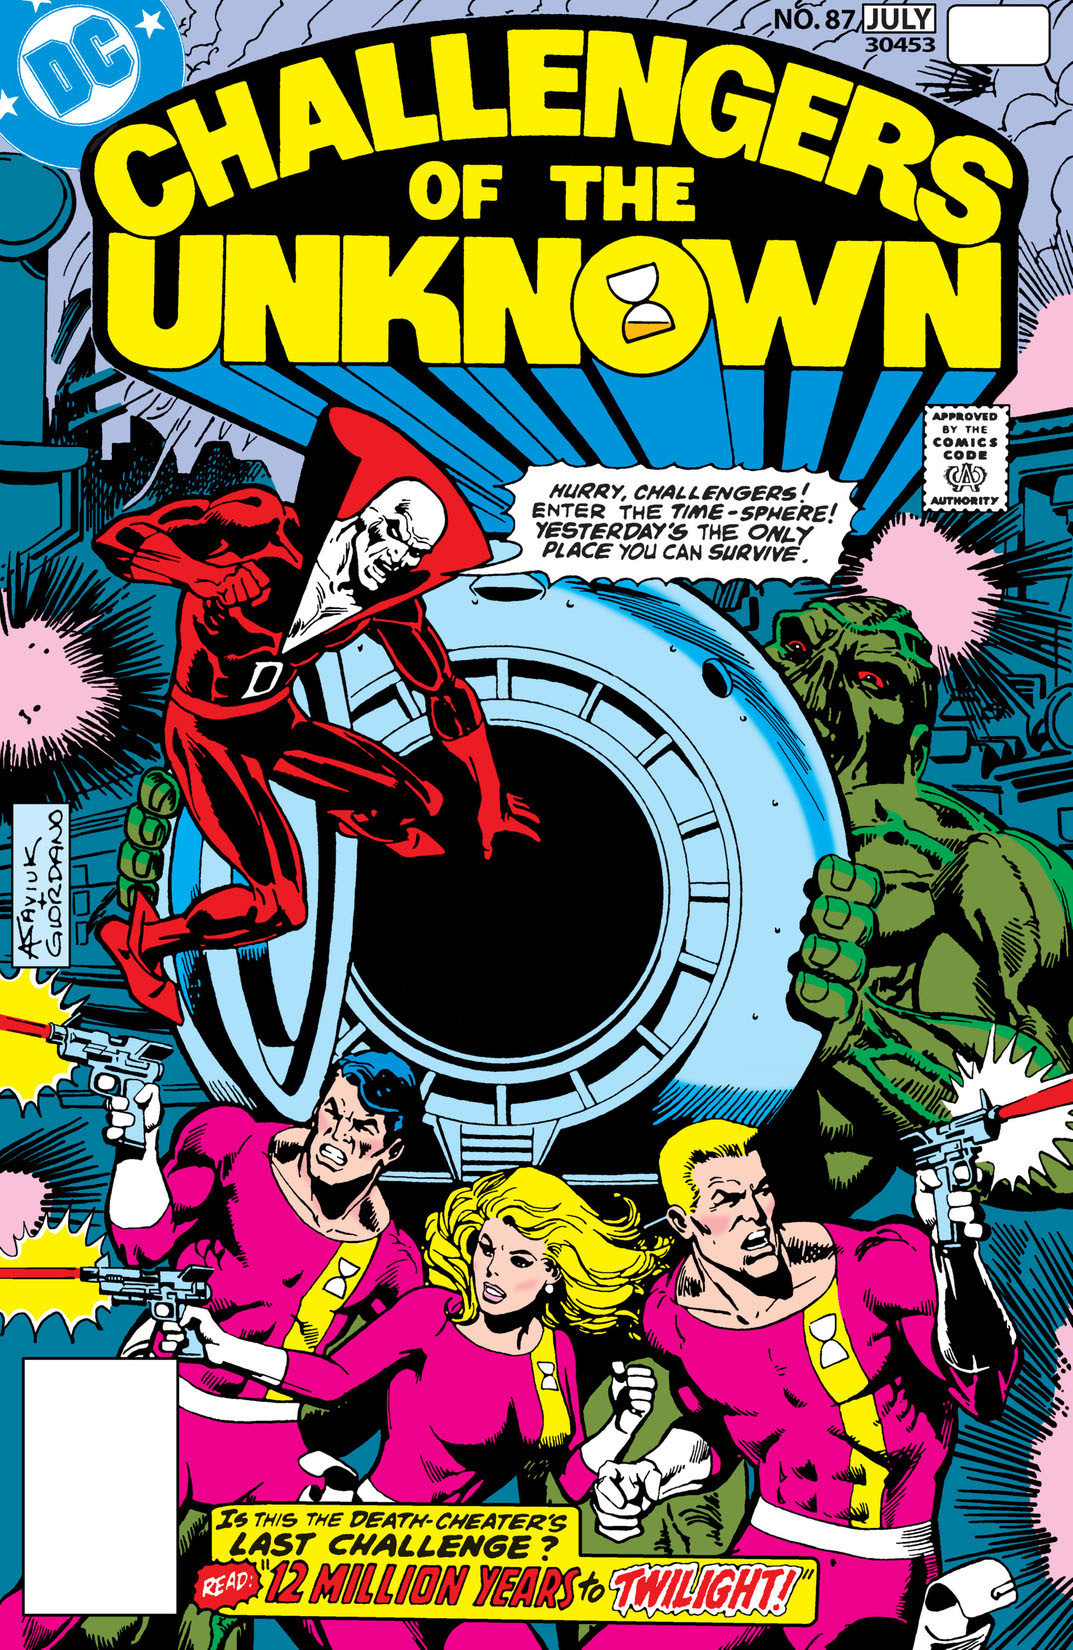 Challengers of the Unknown (1958-) #87 preview images